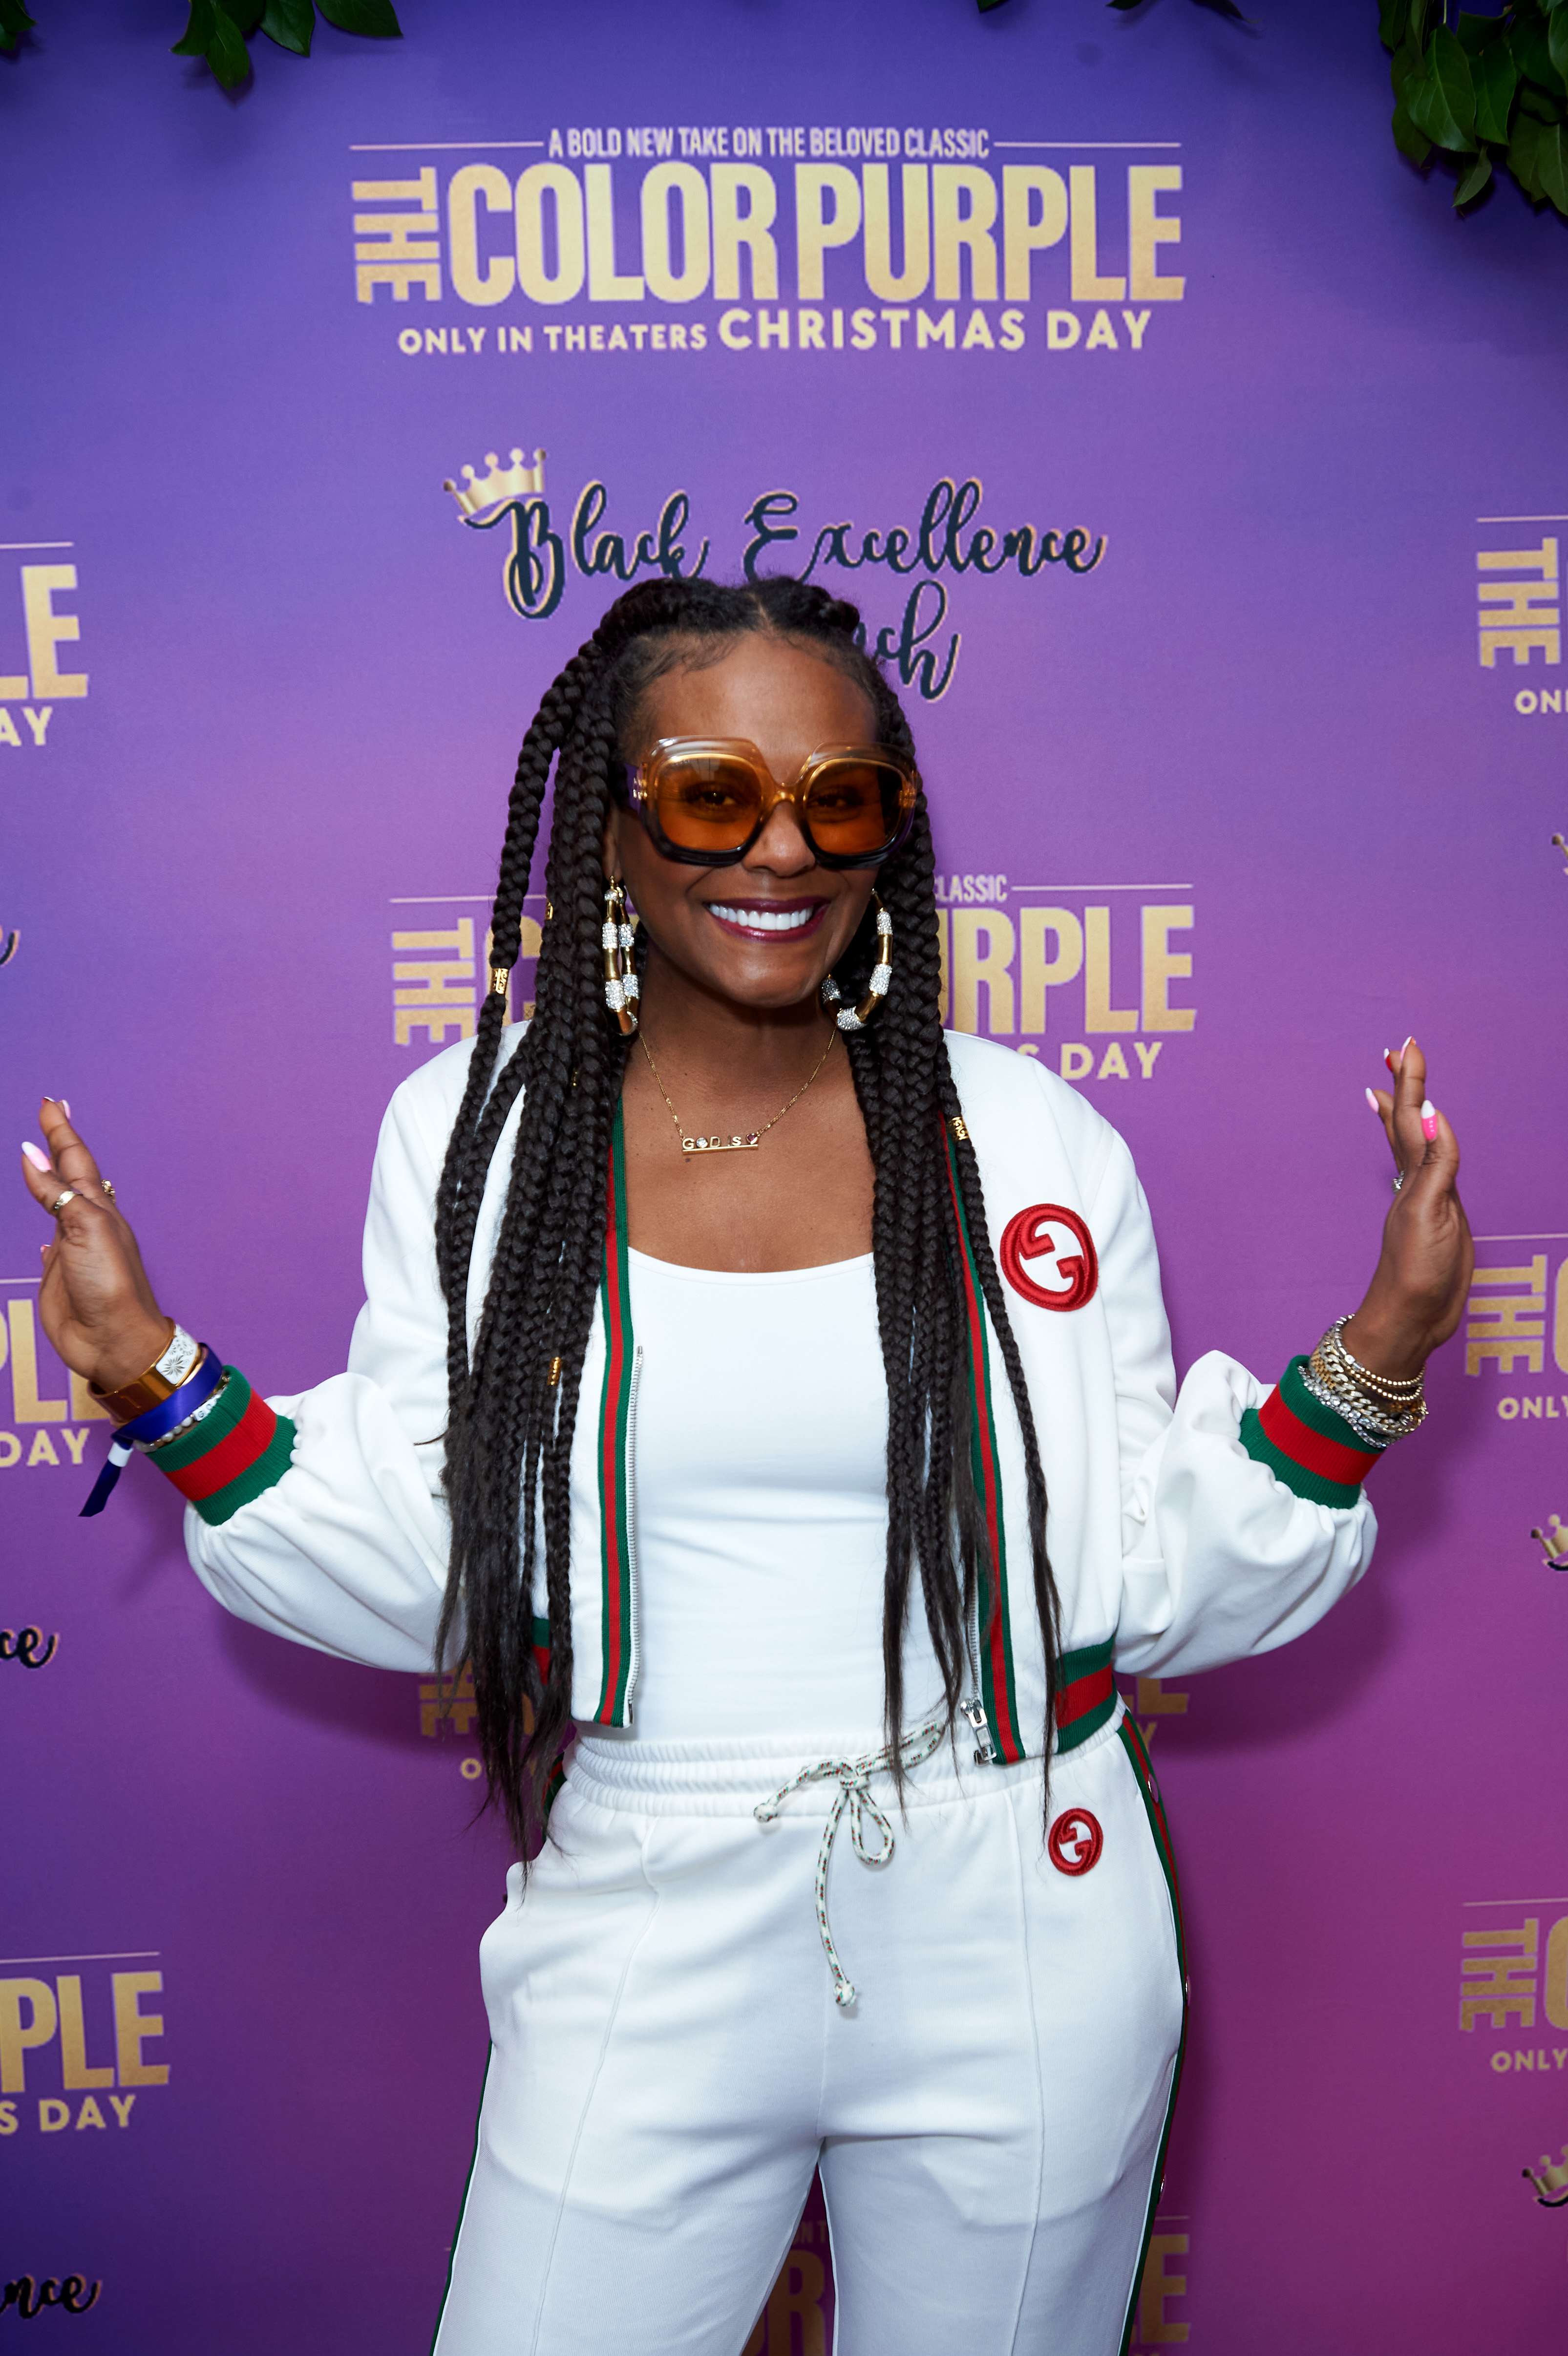 Black Excellence Brunch Celebrates "The Color Purple" Hosted By Trell Thomas